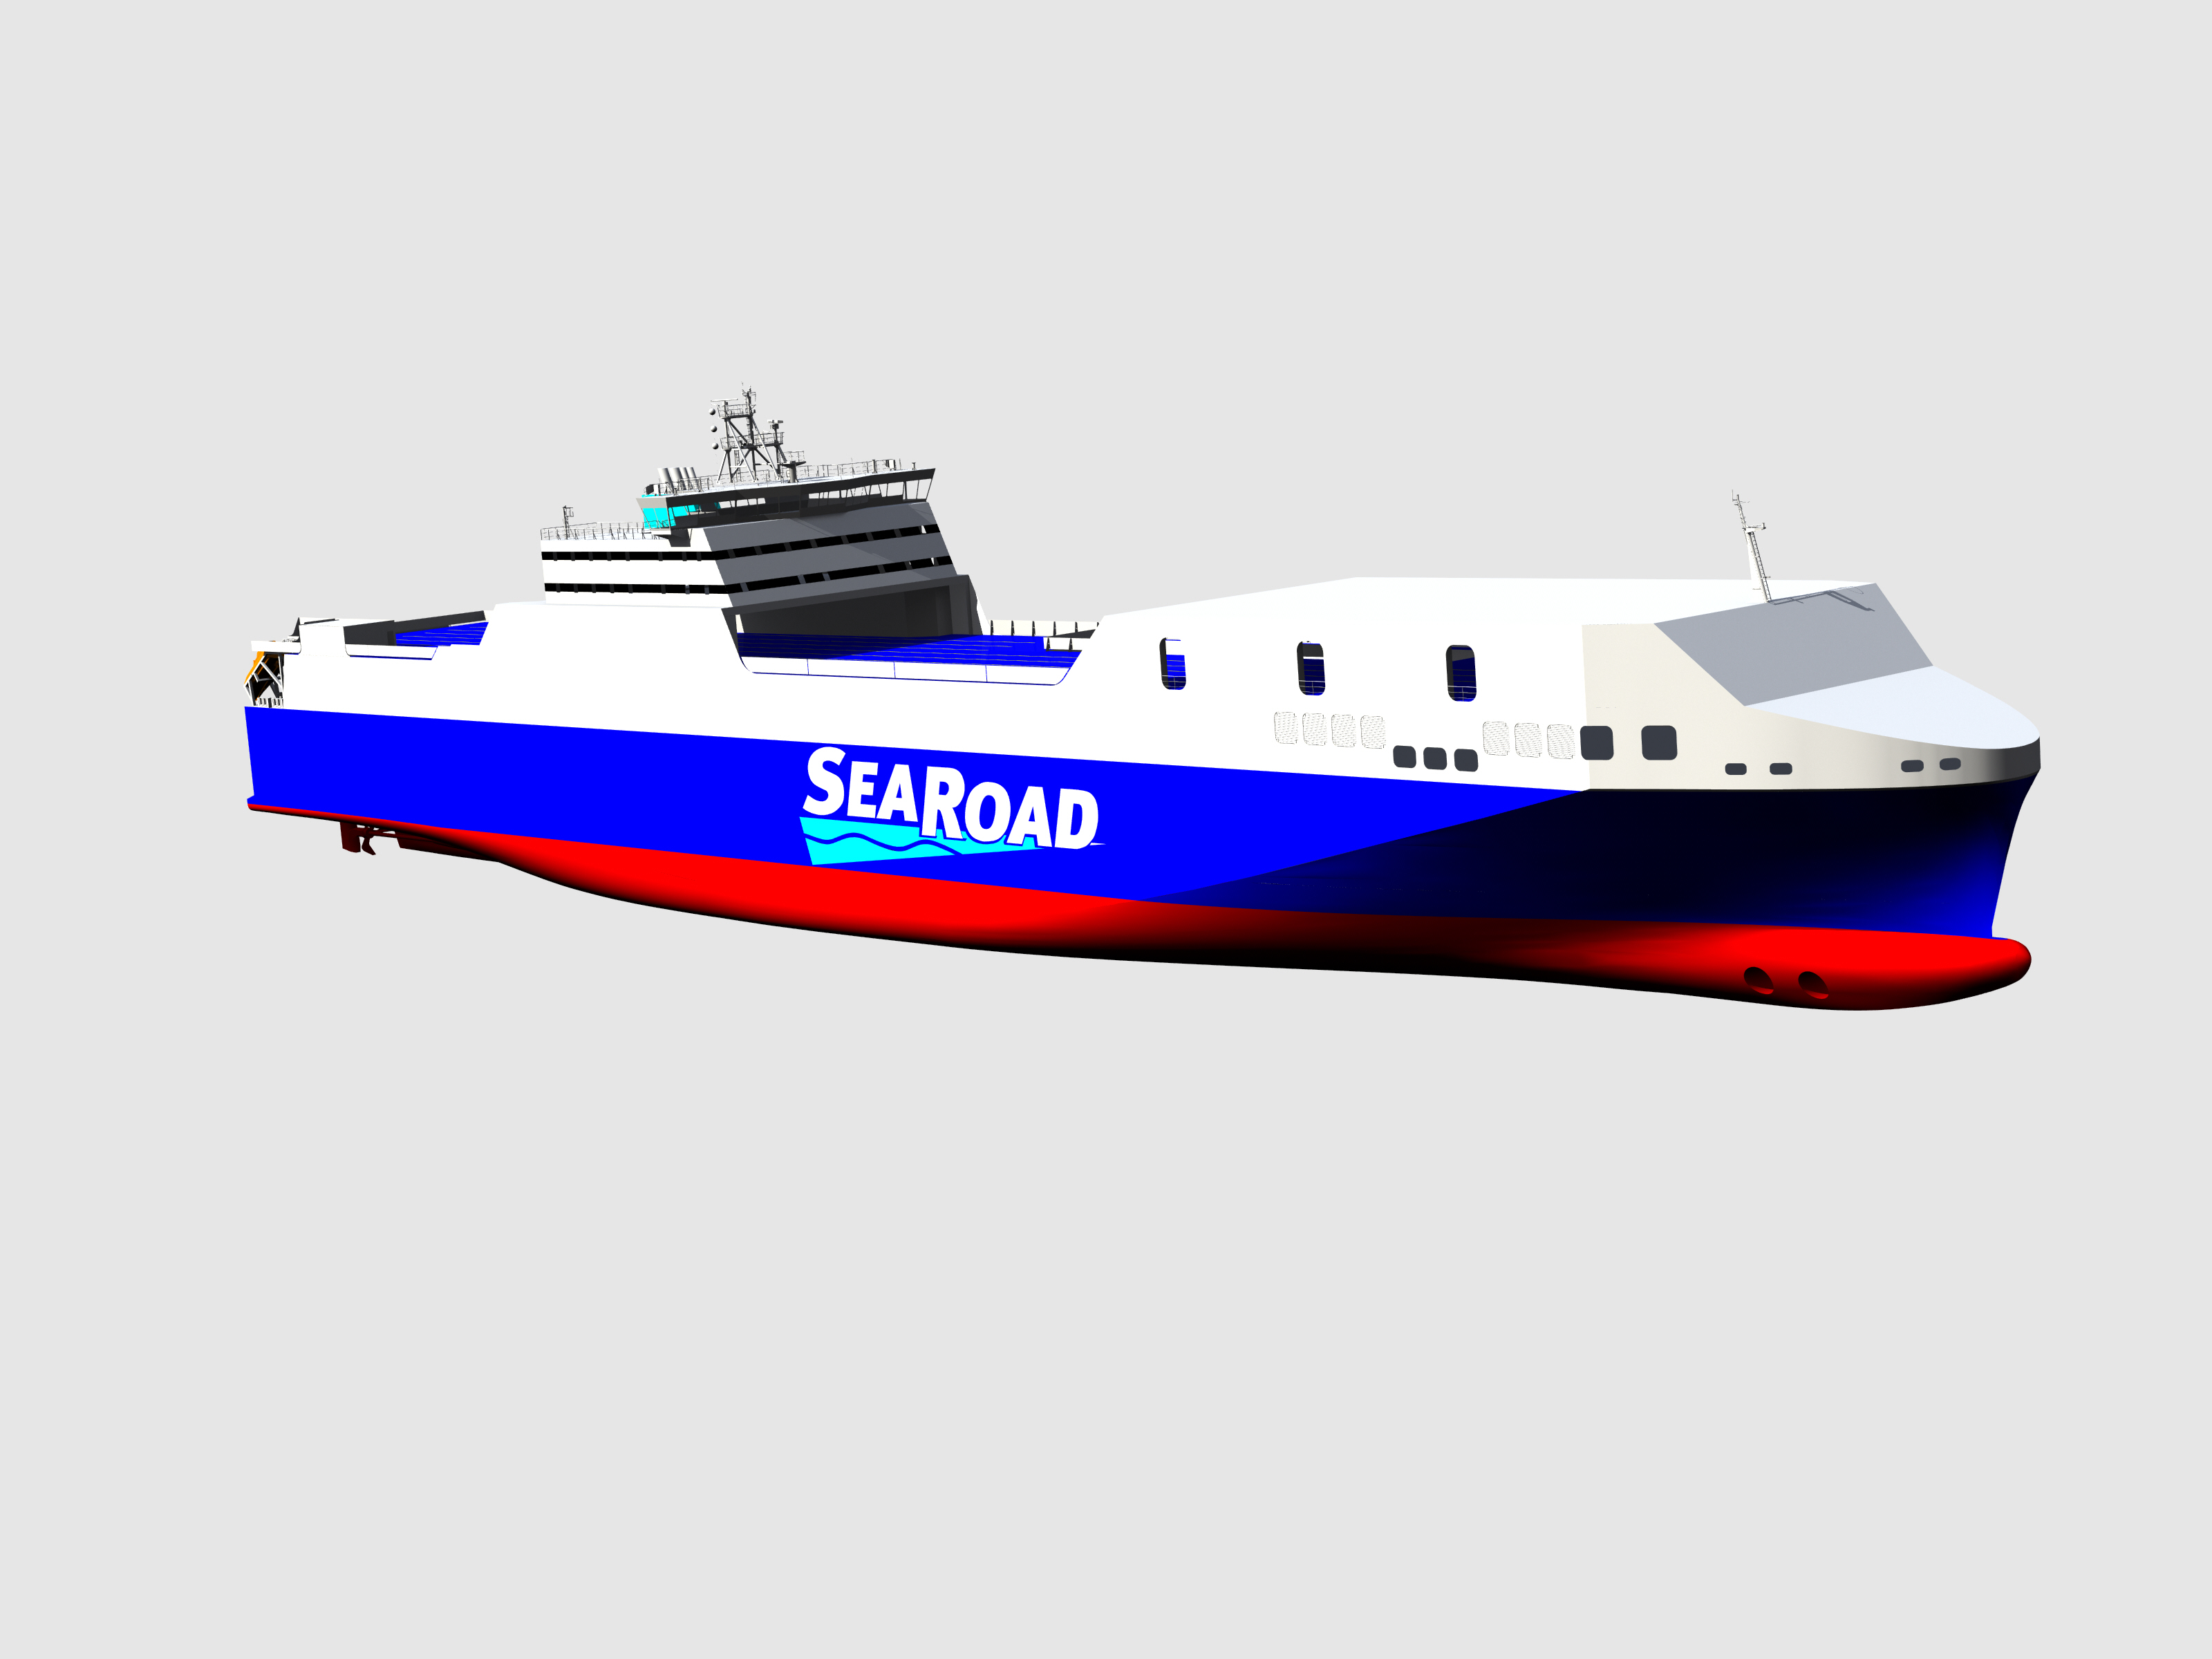 MacGregor to supply RoRo equipment to SeaRoad's LNG-fueled vessel